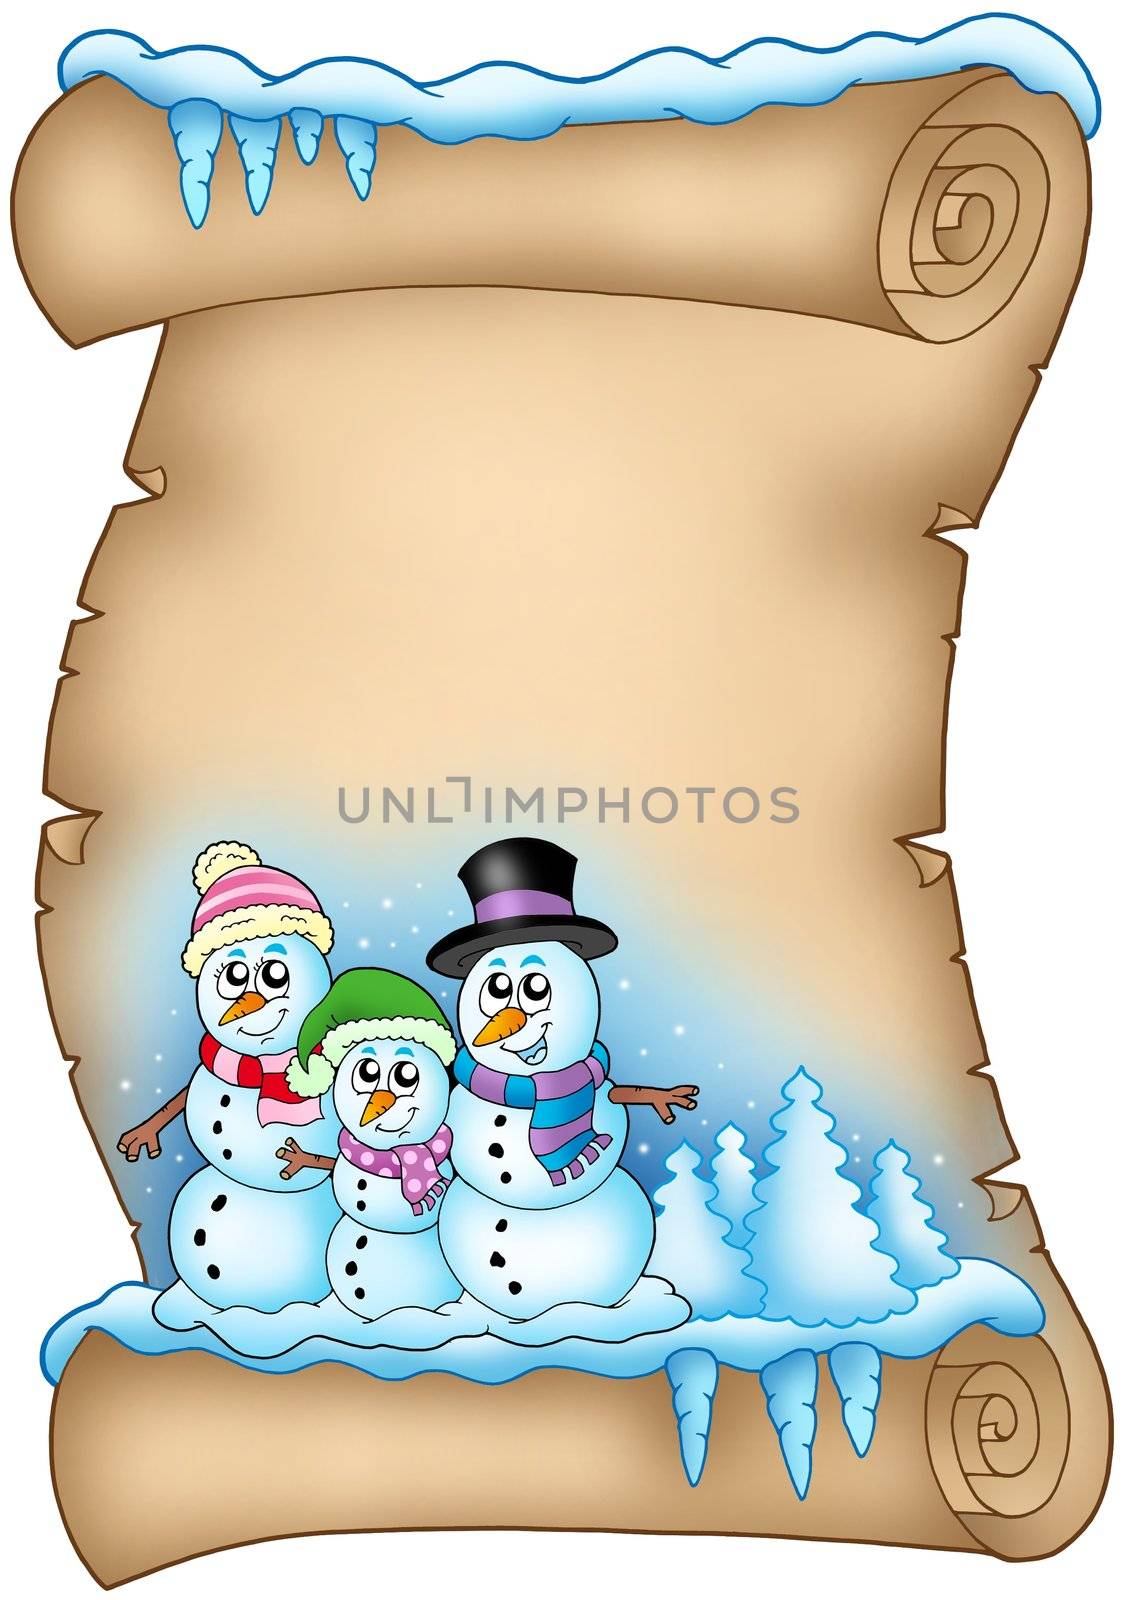 Winter parchment with snowman family - color illustration.